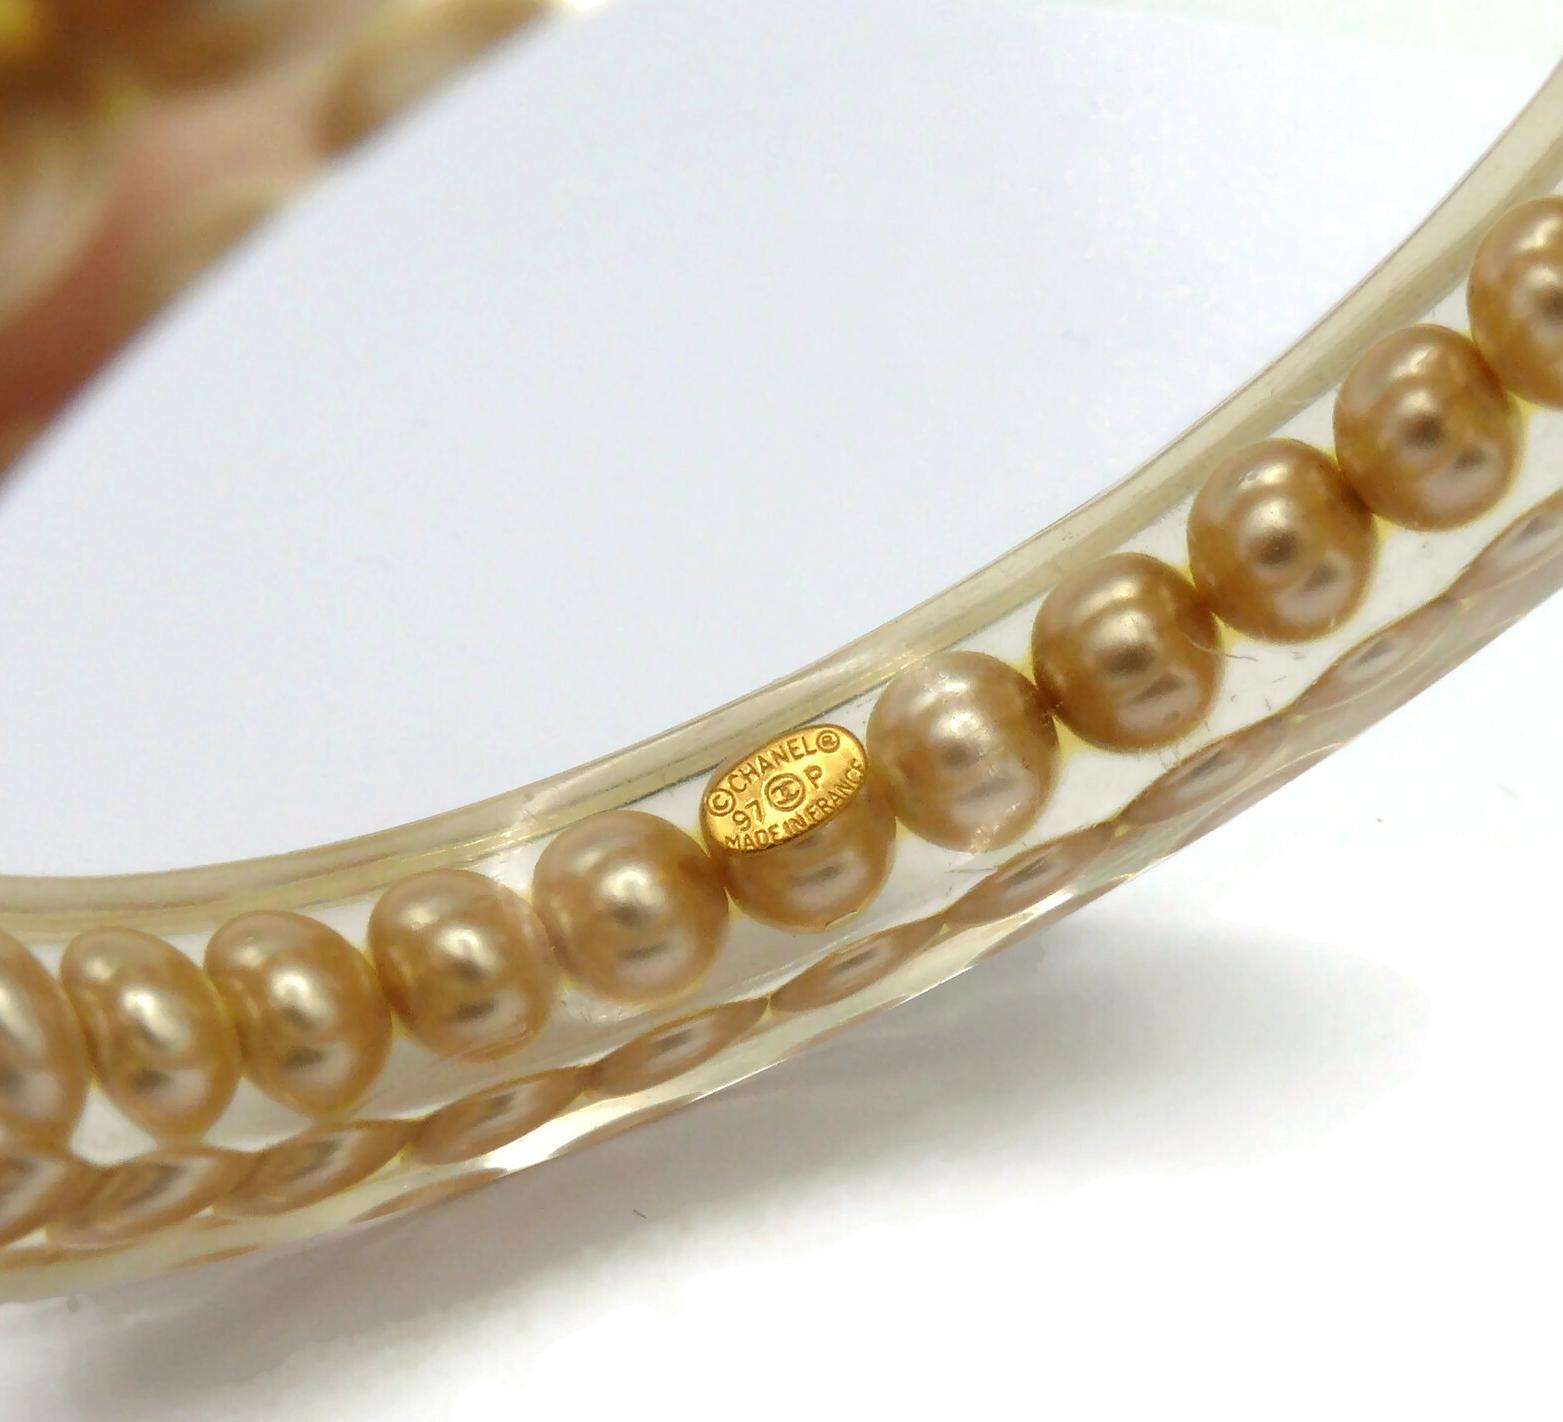 CHANEL by KARL LAGERFELD Vintage Lucite Pearl Inlaid Bangle, Spring 1997 For Sale 8